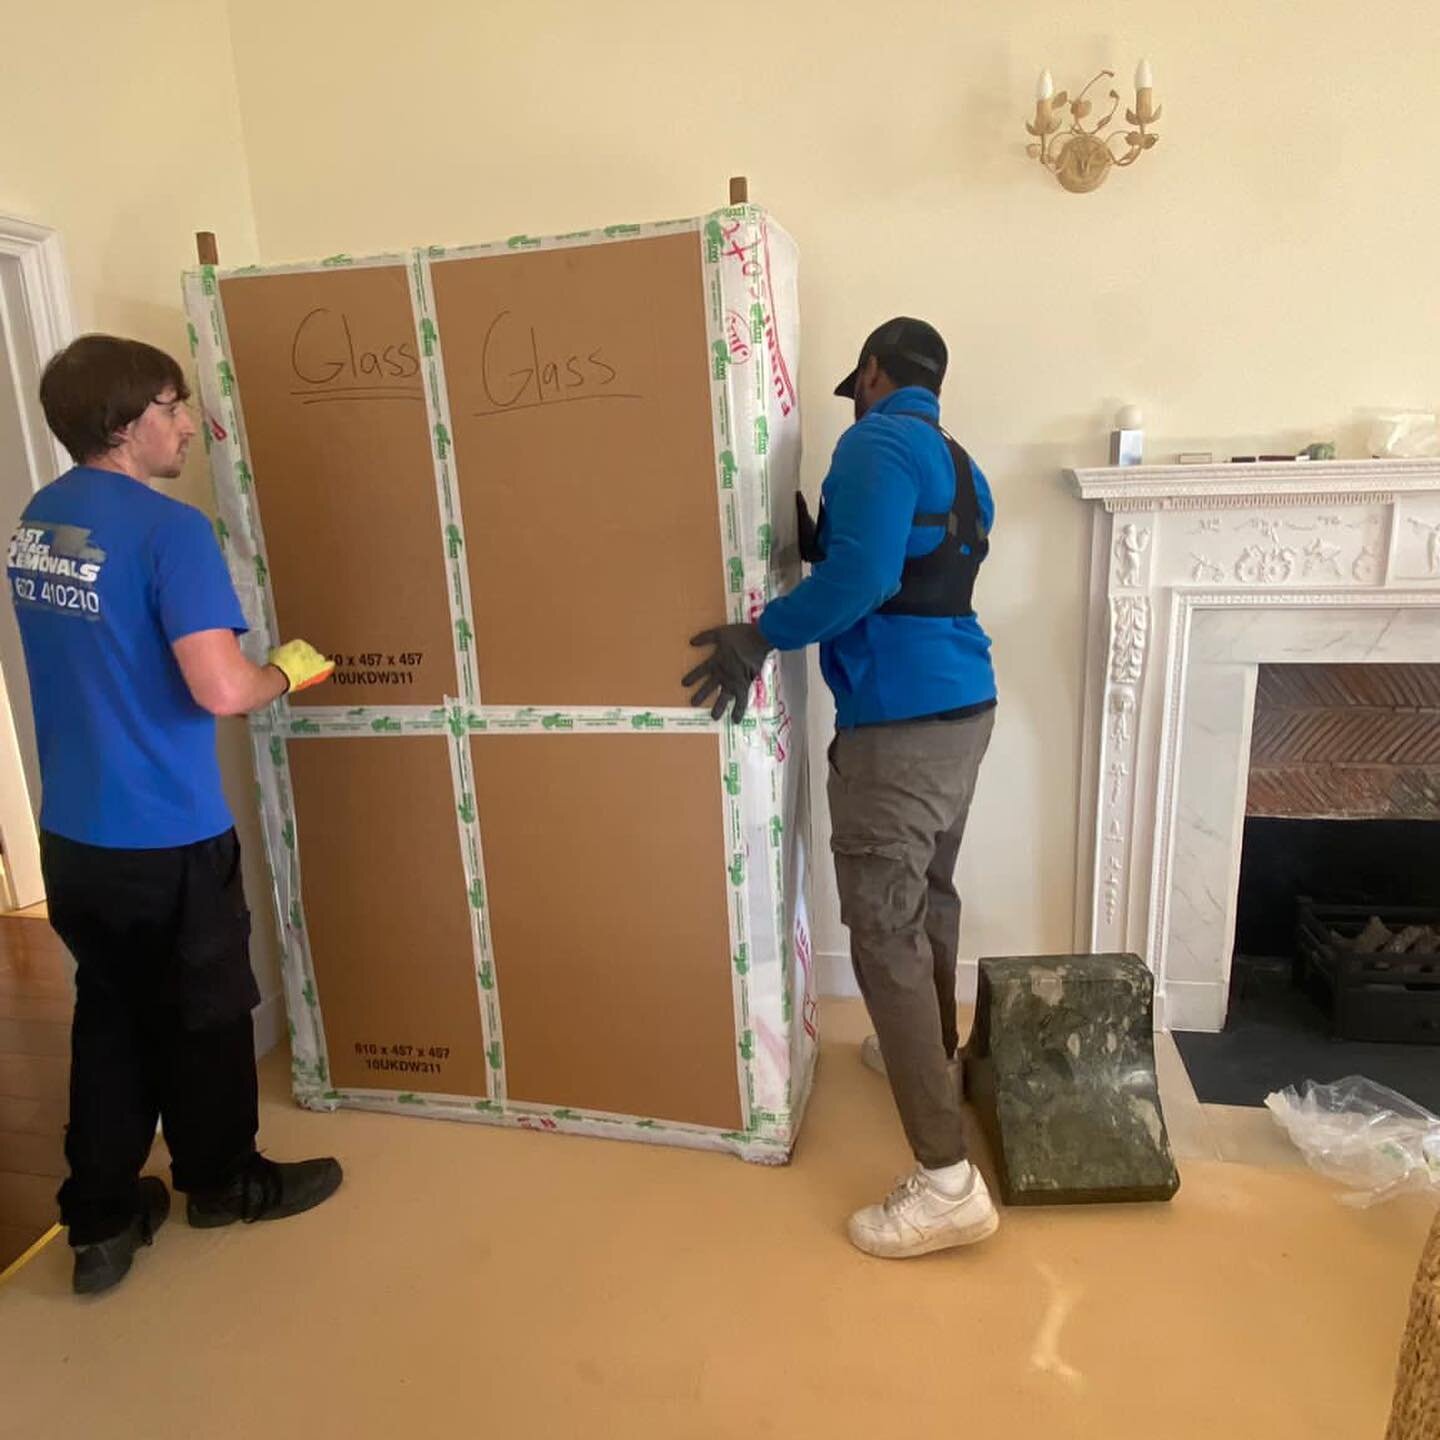 You can be sure that we&rsquo;ll always protect your items when we&rsquo;re handling them and when in transit. 

We have a team of skilled movers that are fully trained and experienced to move your belongings to your new home ☺️

#londonremovals #tun